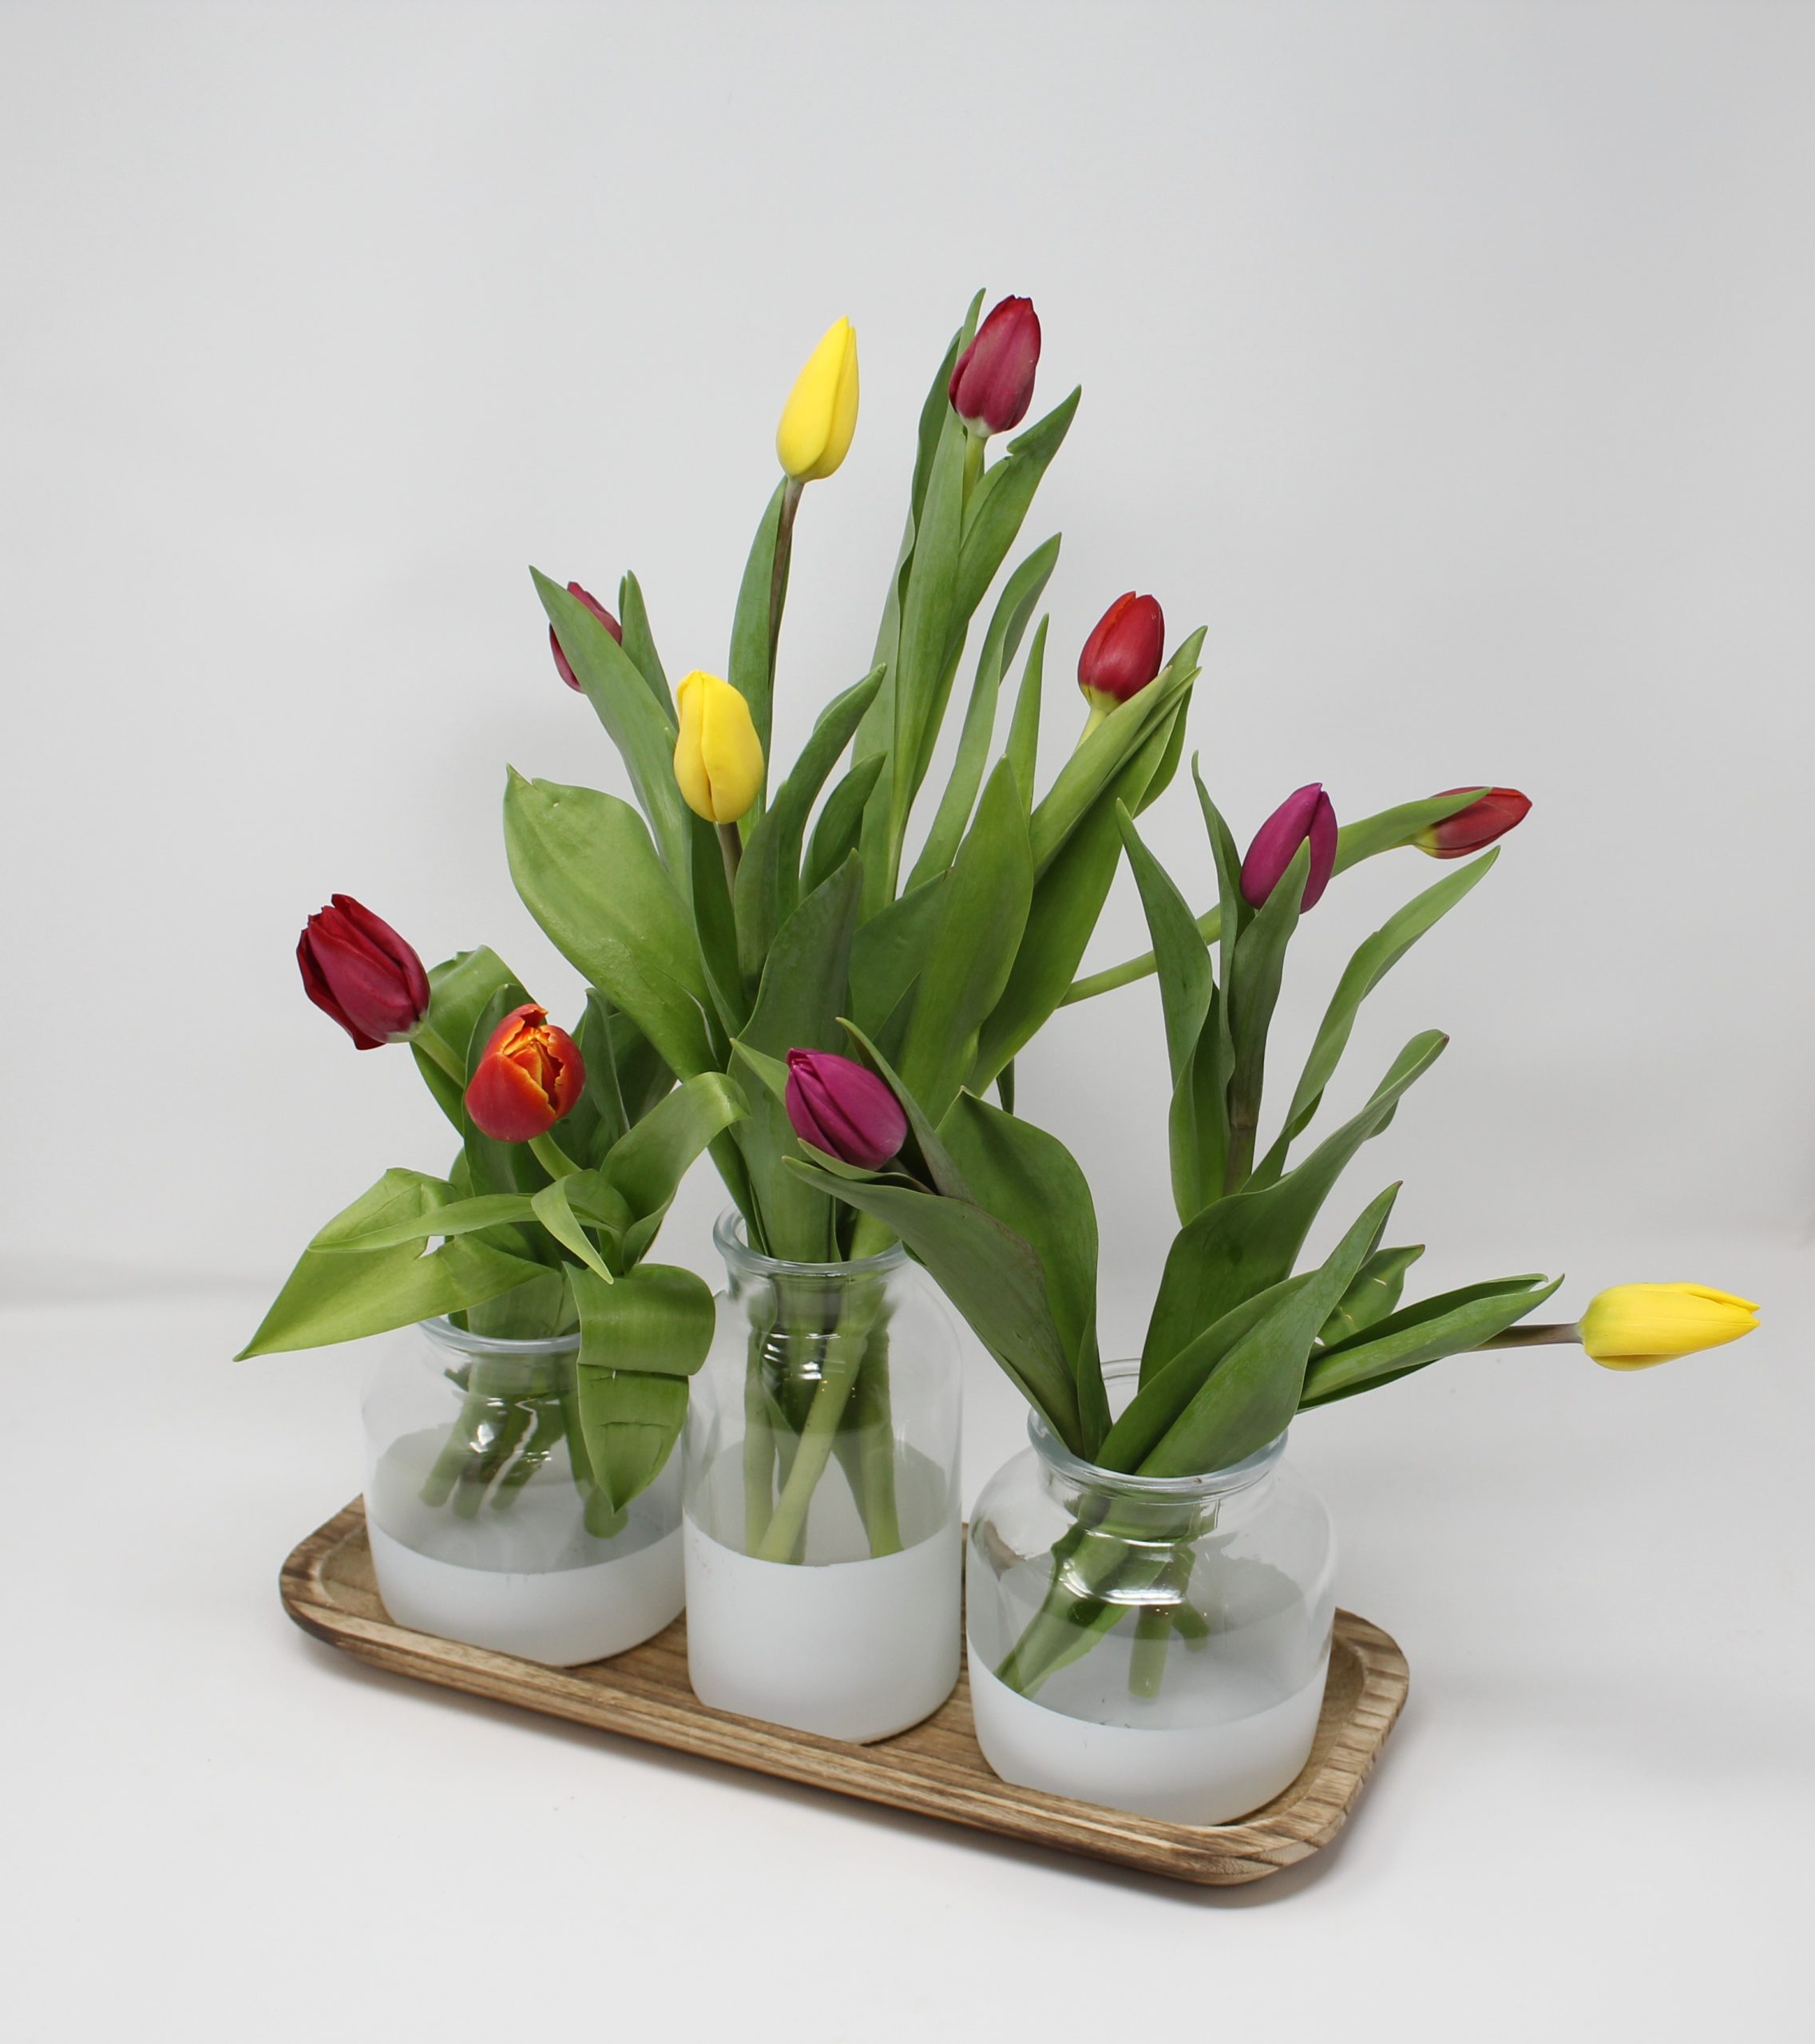 Photo of a wooden tray with three small glass vases with tulips.